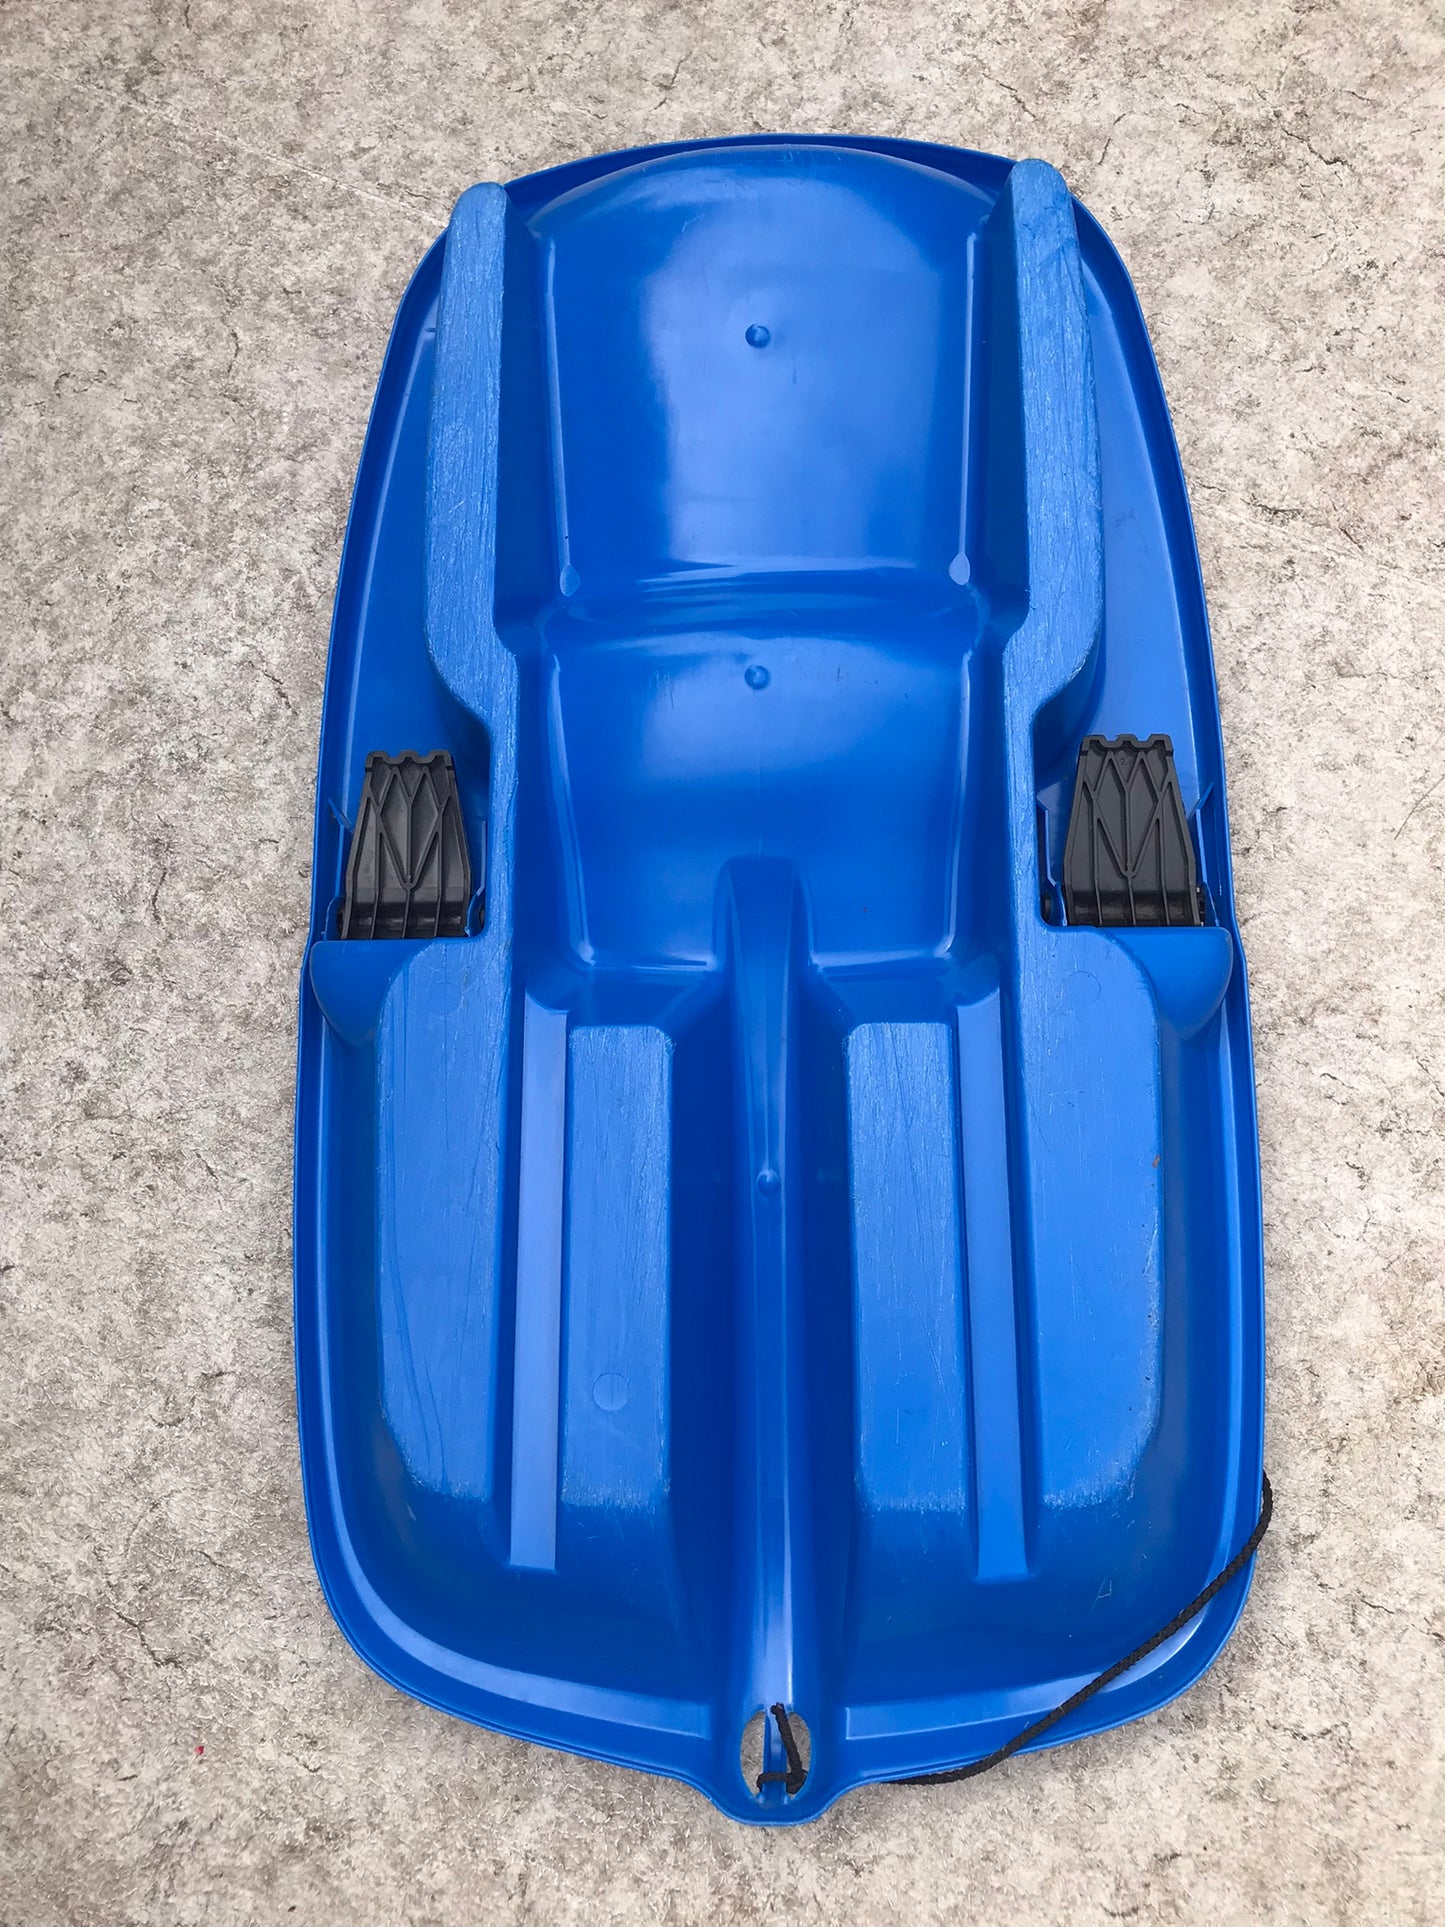 Snow Sled Super Booster 1 Person Blue Plastic Snow Sled Child Age 5-12 40 Inch With Hand Breaks Excellent